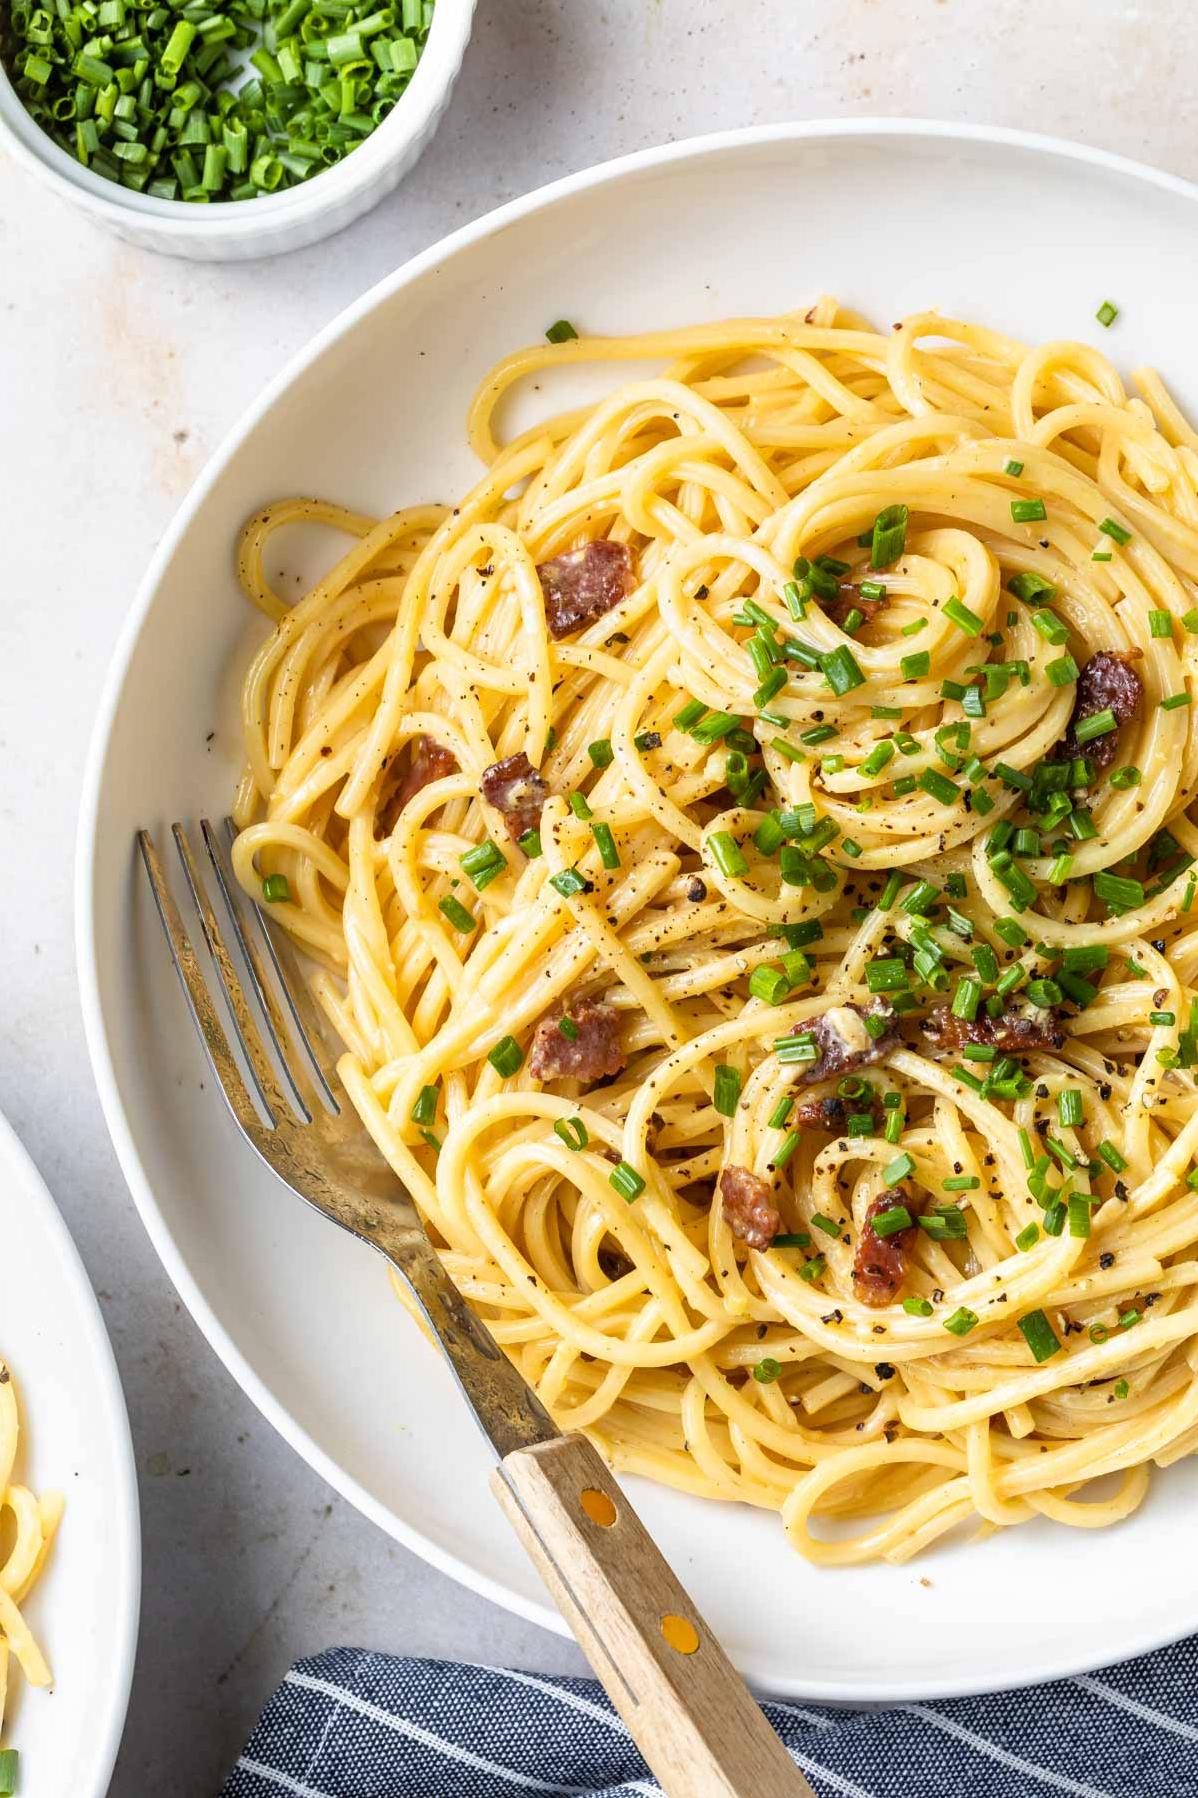  Get ready for a carbonara recipe that doesn't include dairy but still tastes amazing